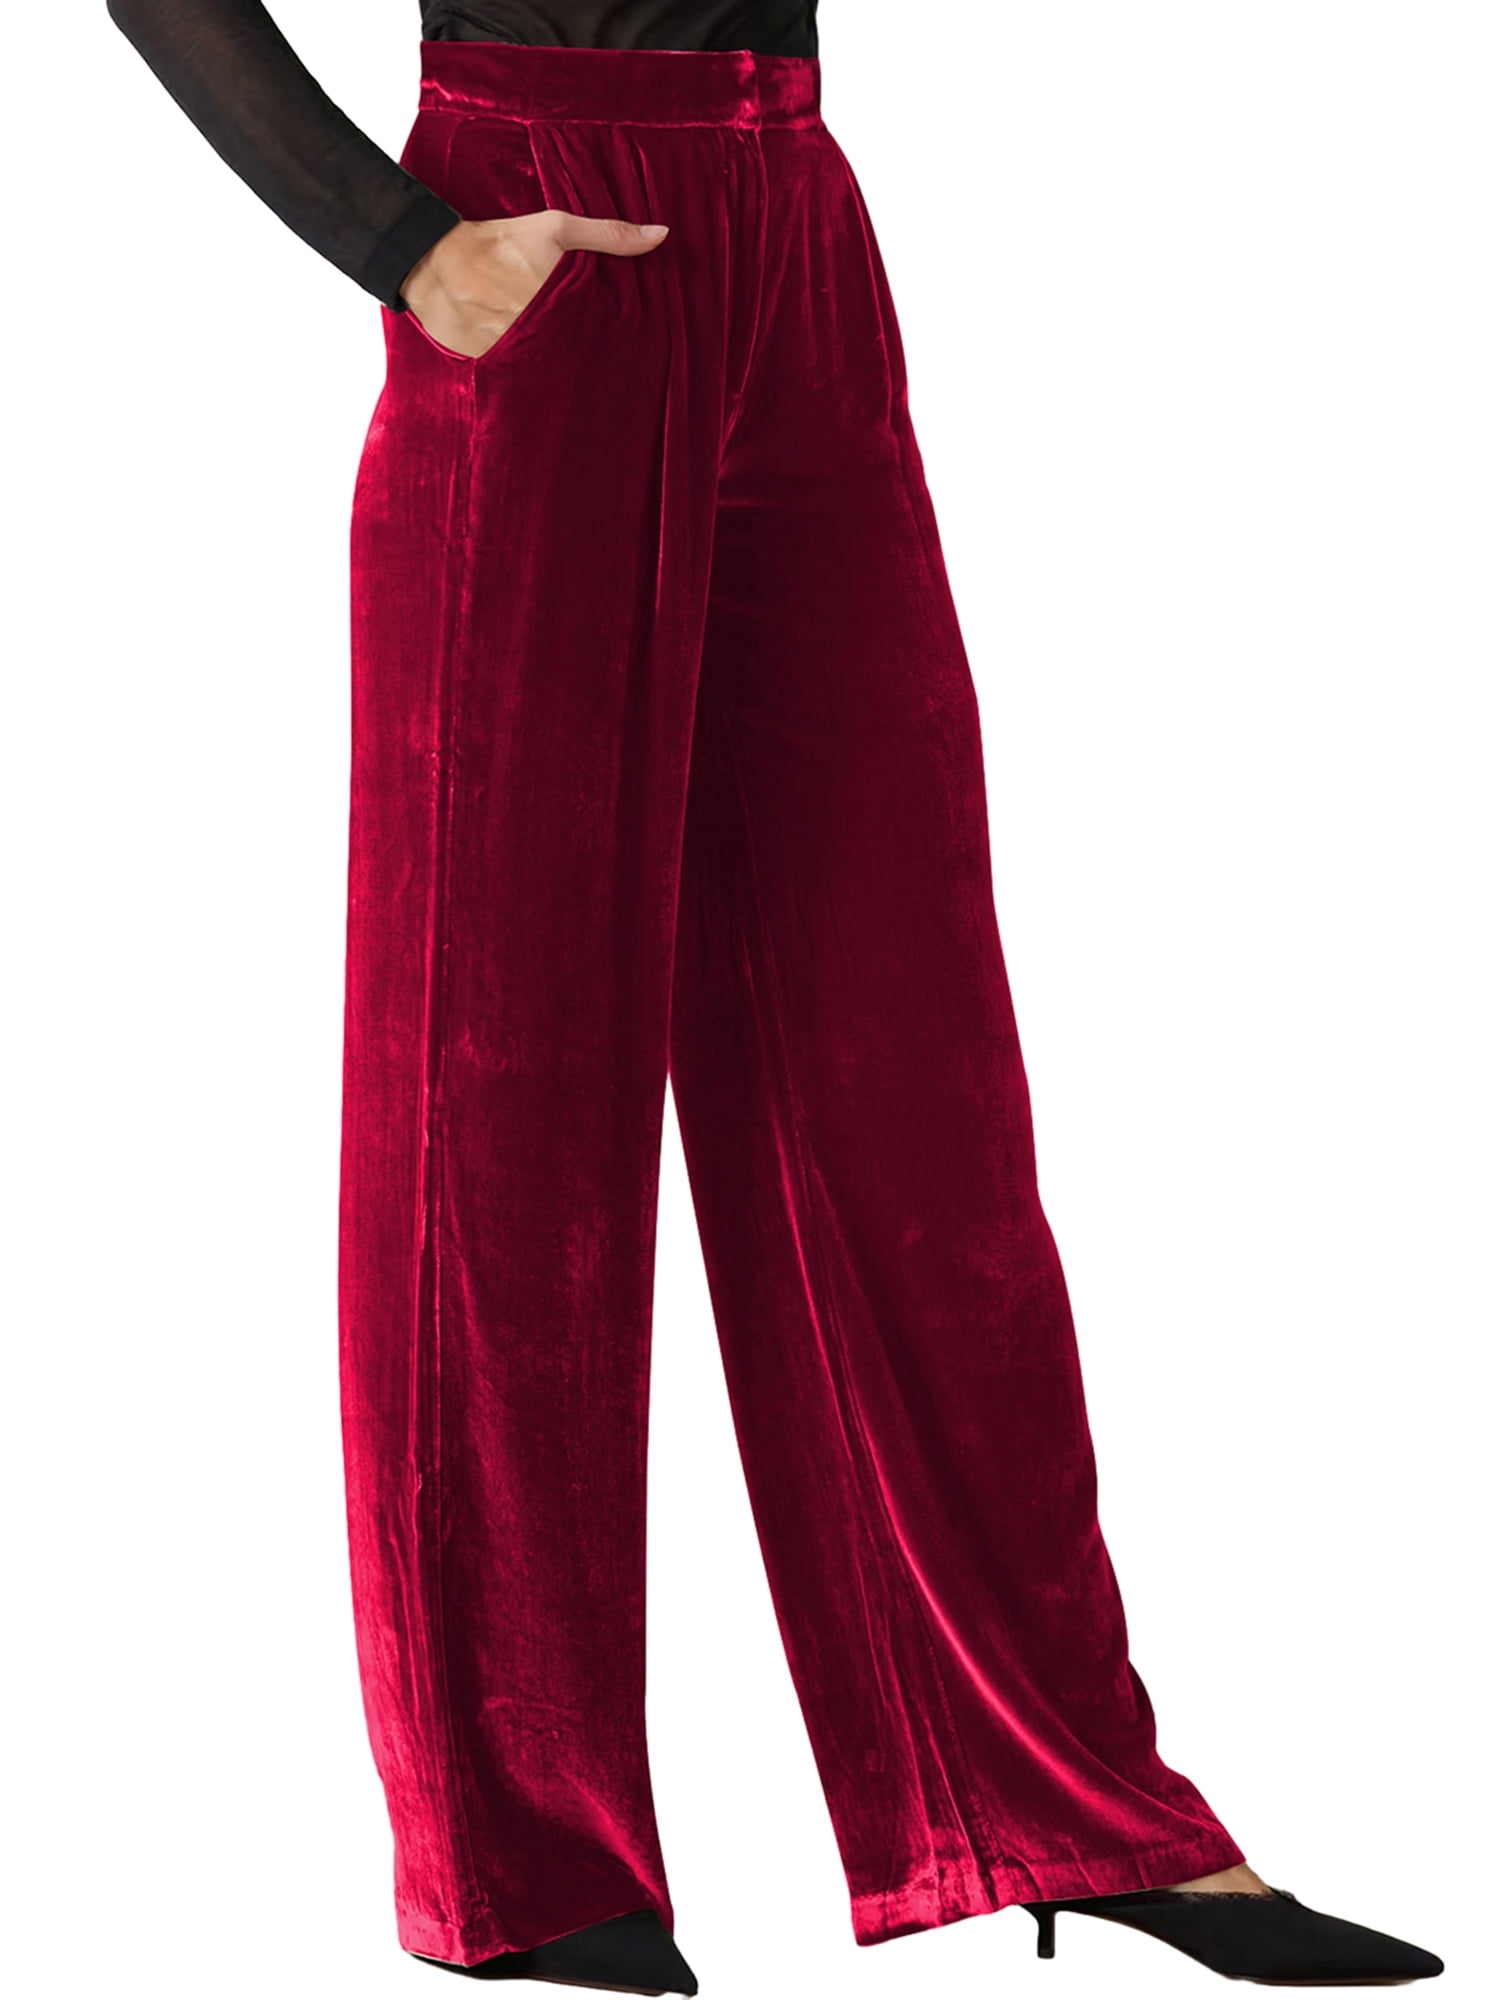 Womens Crushed Velvet High Waisted Stretch Wide Leg Palazzo Pants